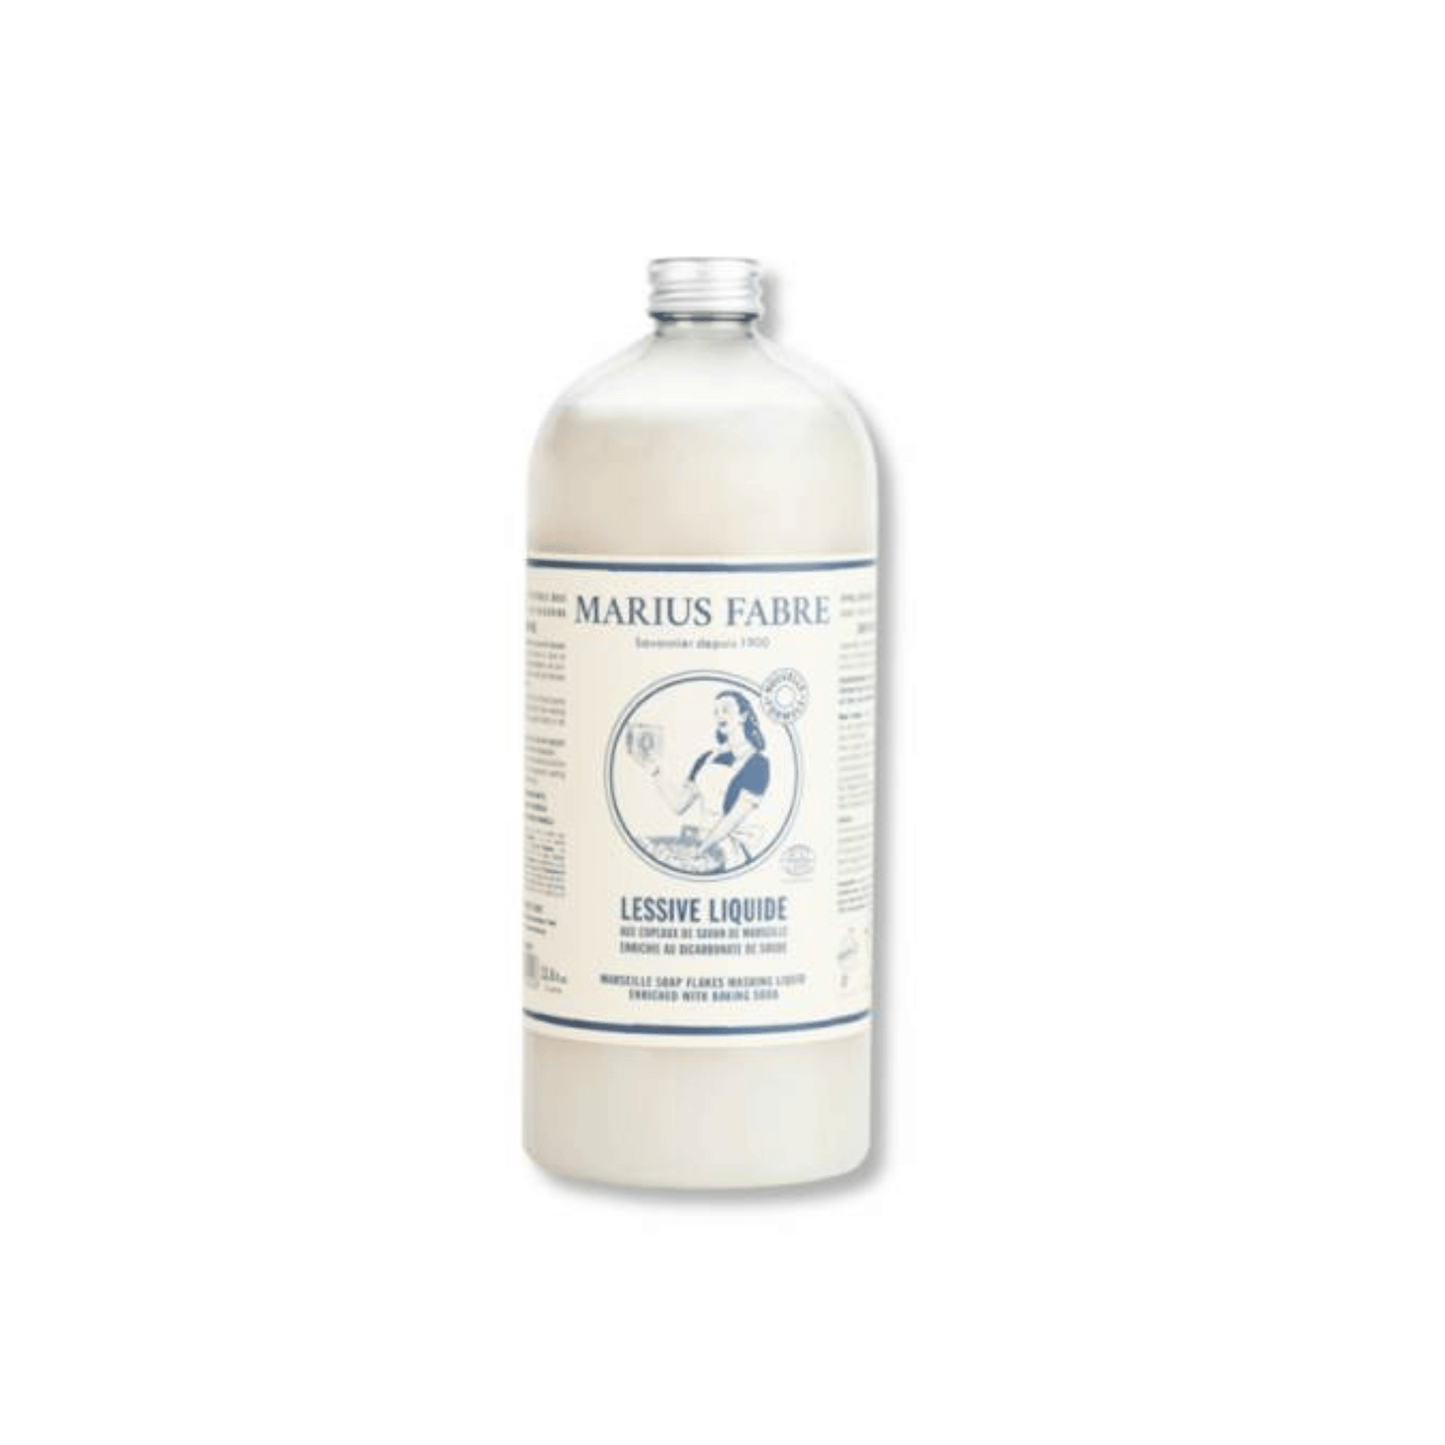 Primary Image of Marseille Liquid Laundry Soap with Bicarbonate of Soda